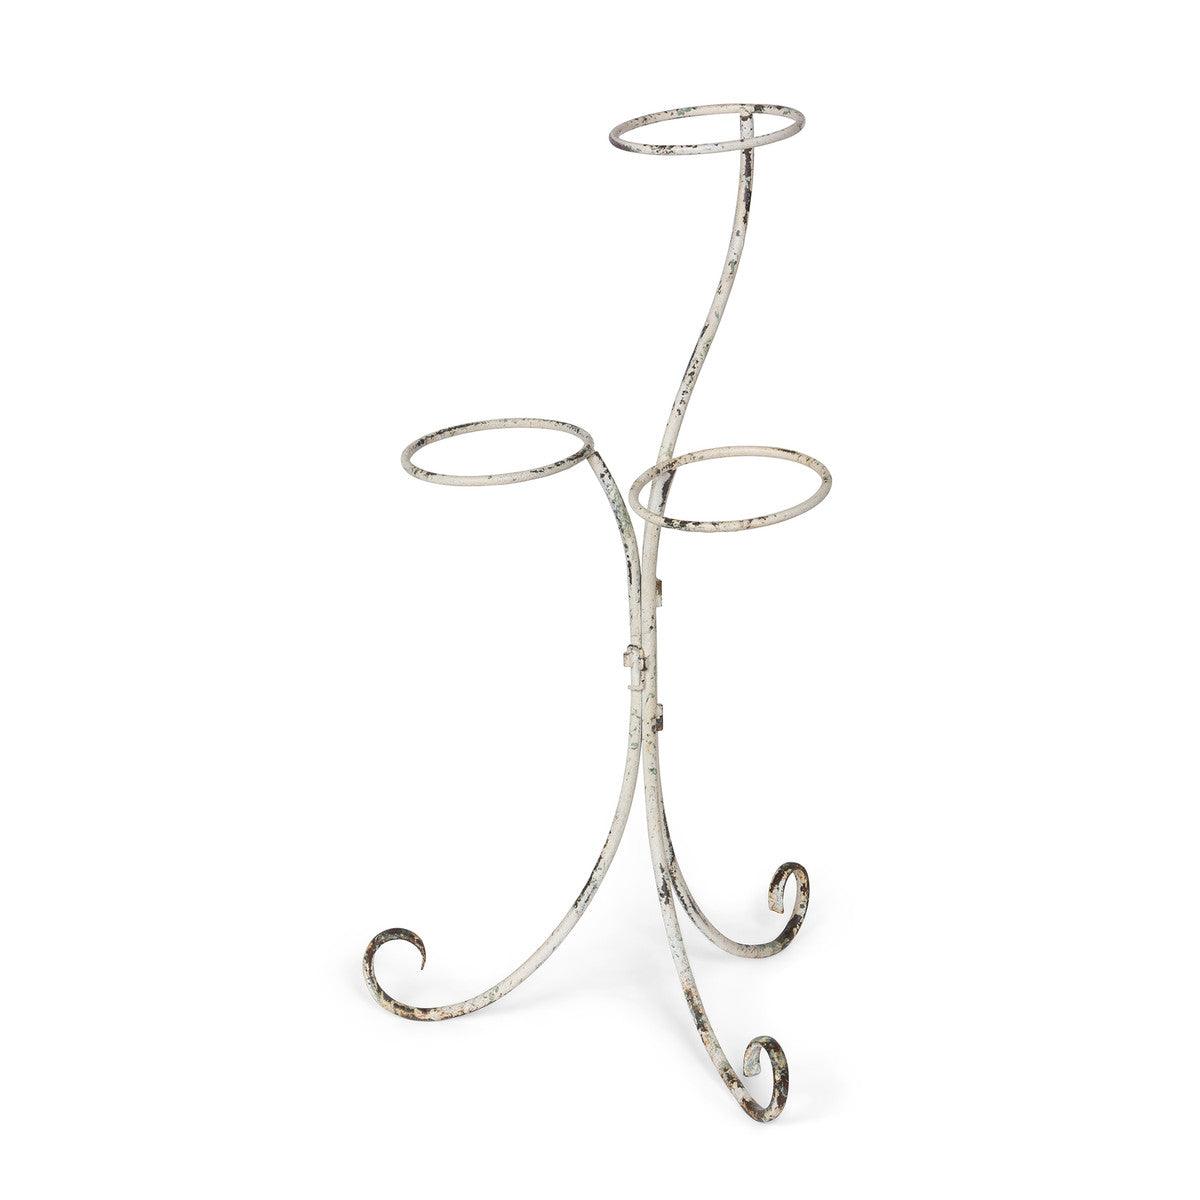 Iron Tiered Standing Pot Rack - Signastyle Boutique